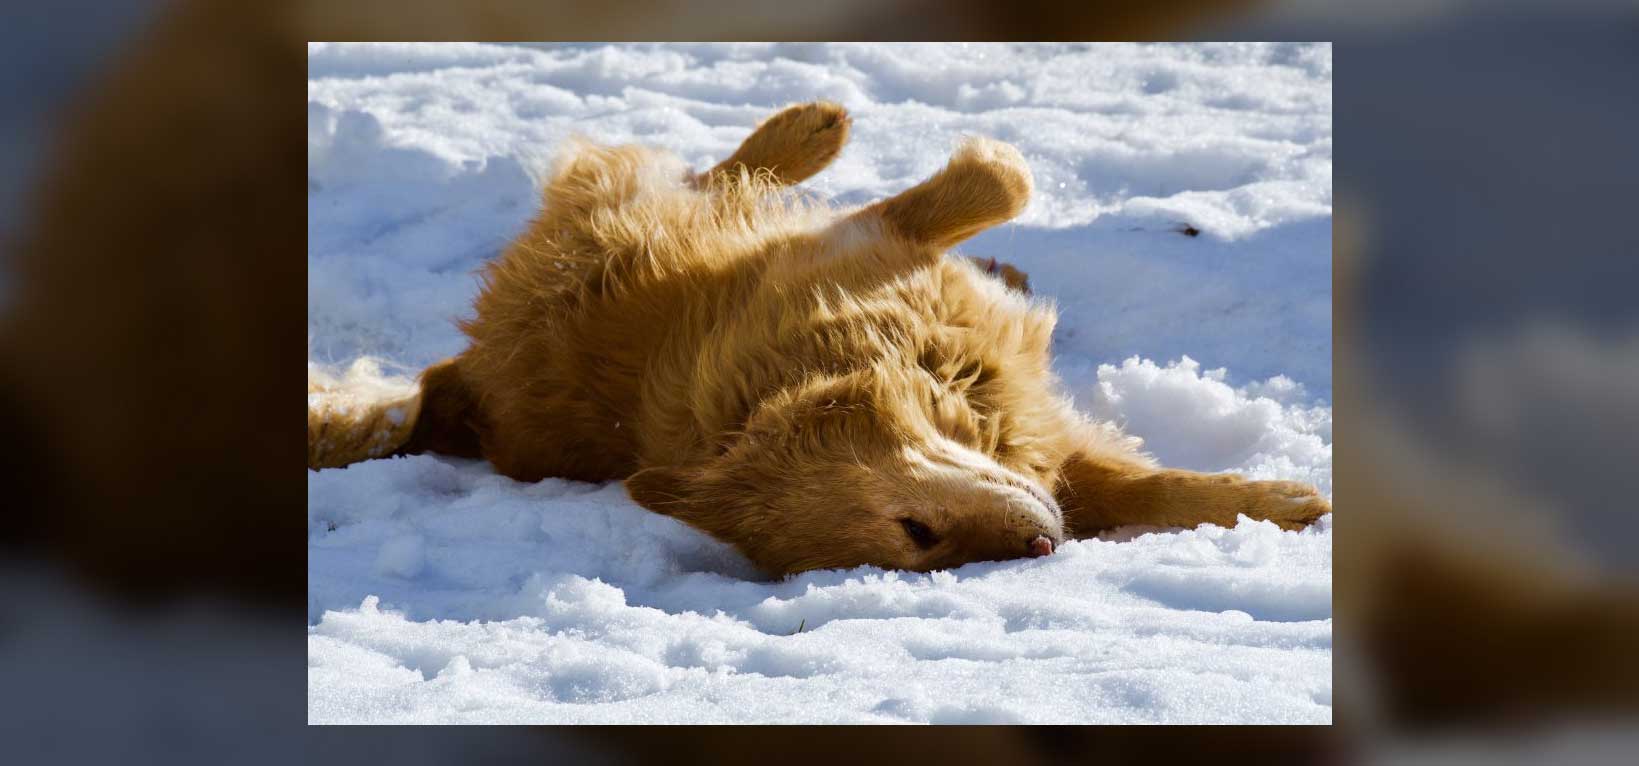 A dog rolling in the snow